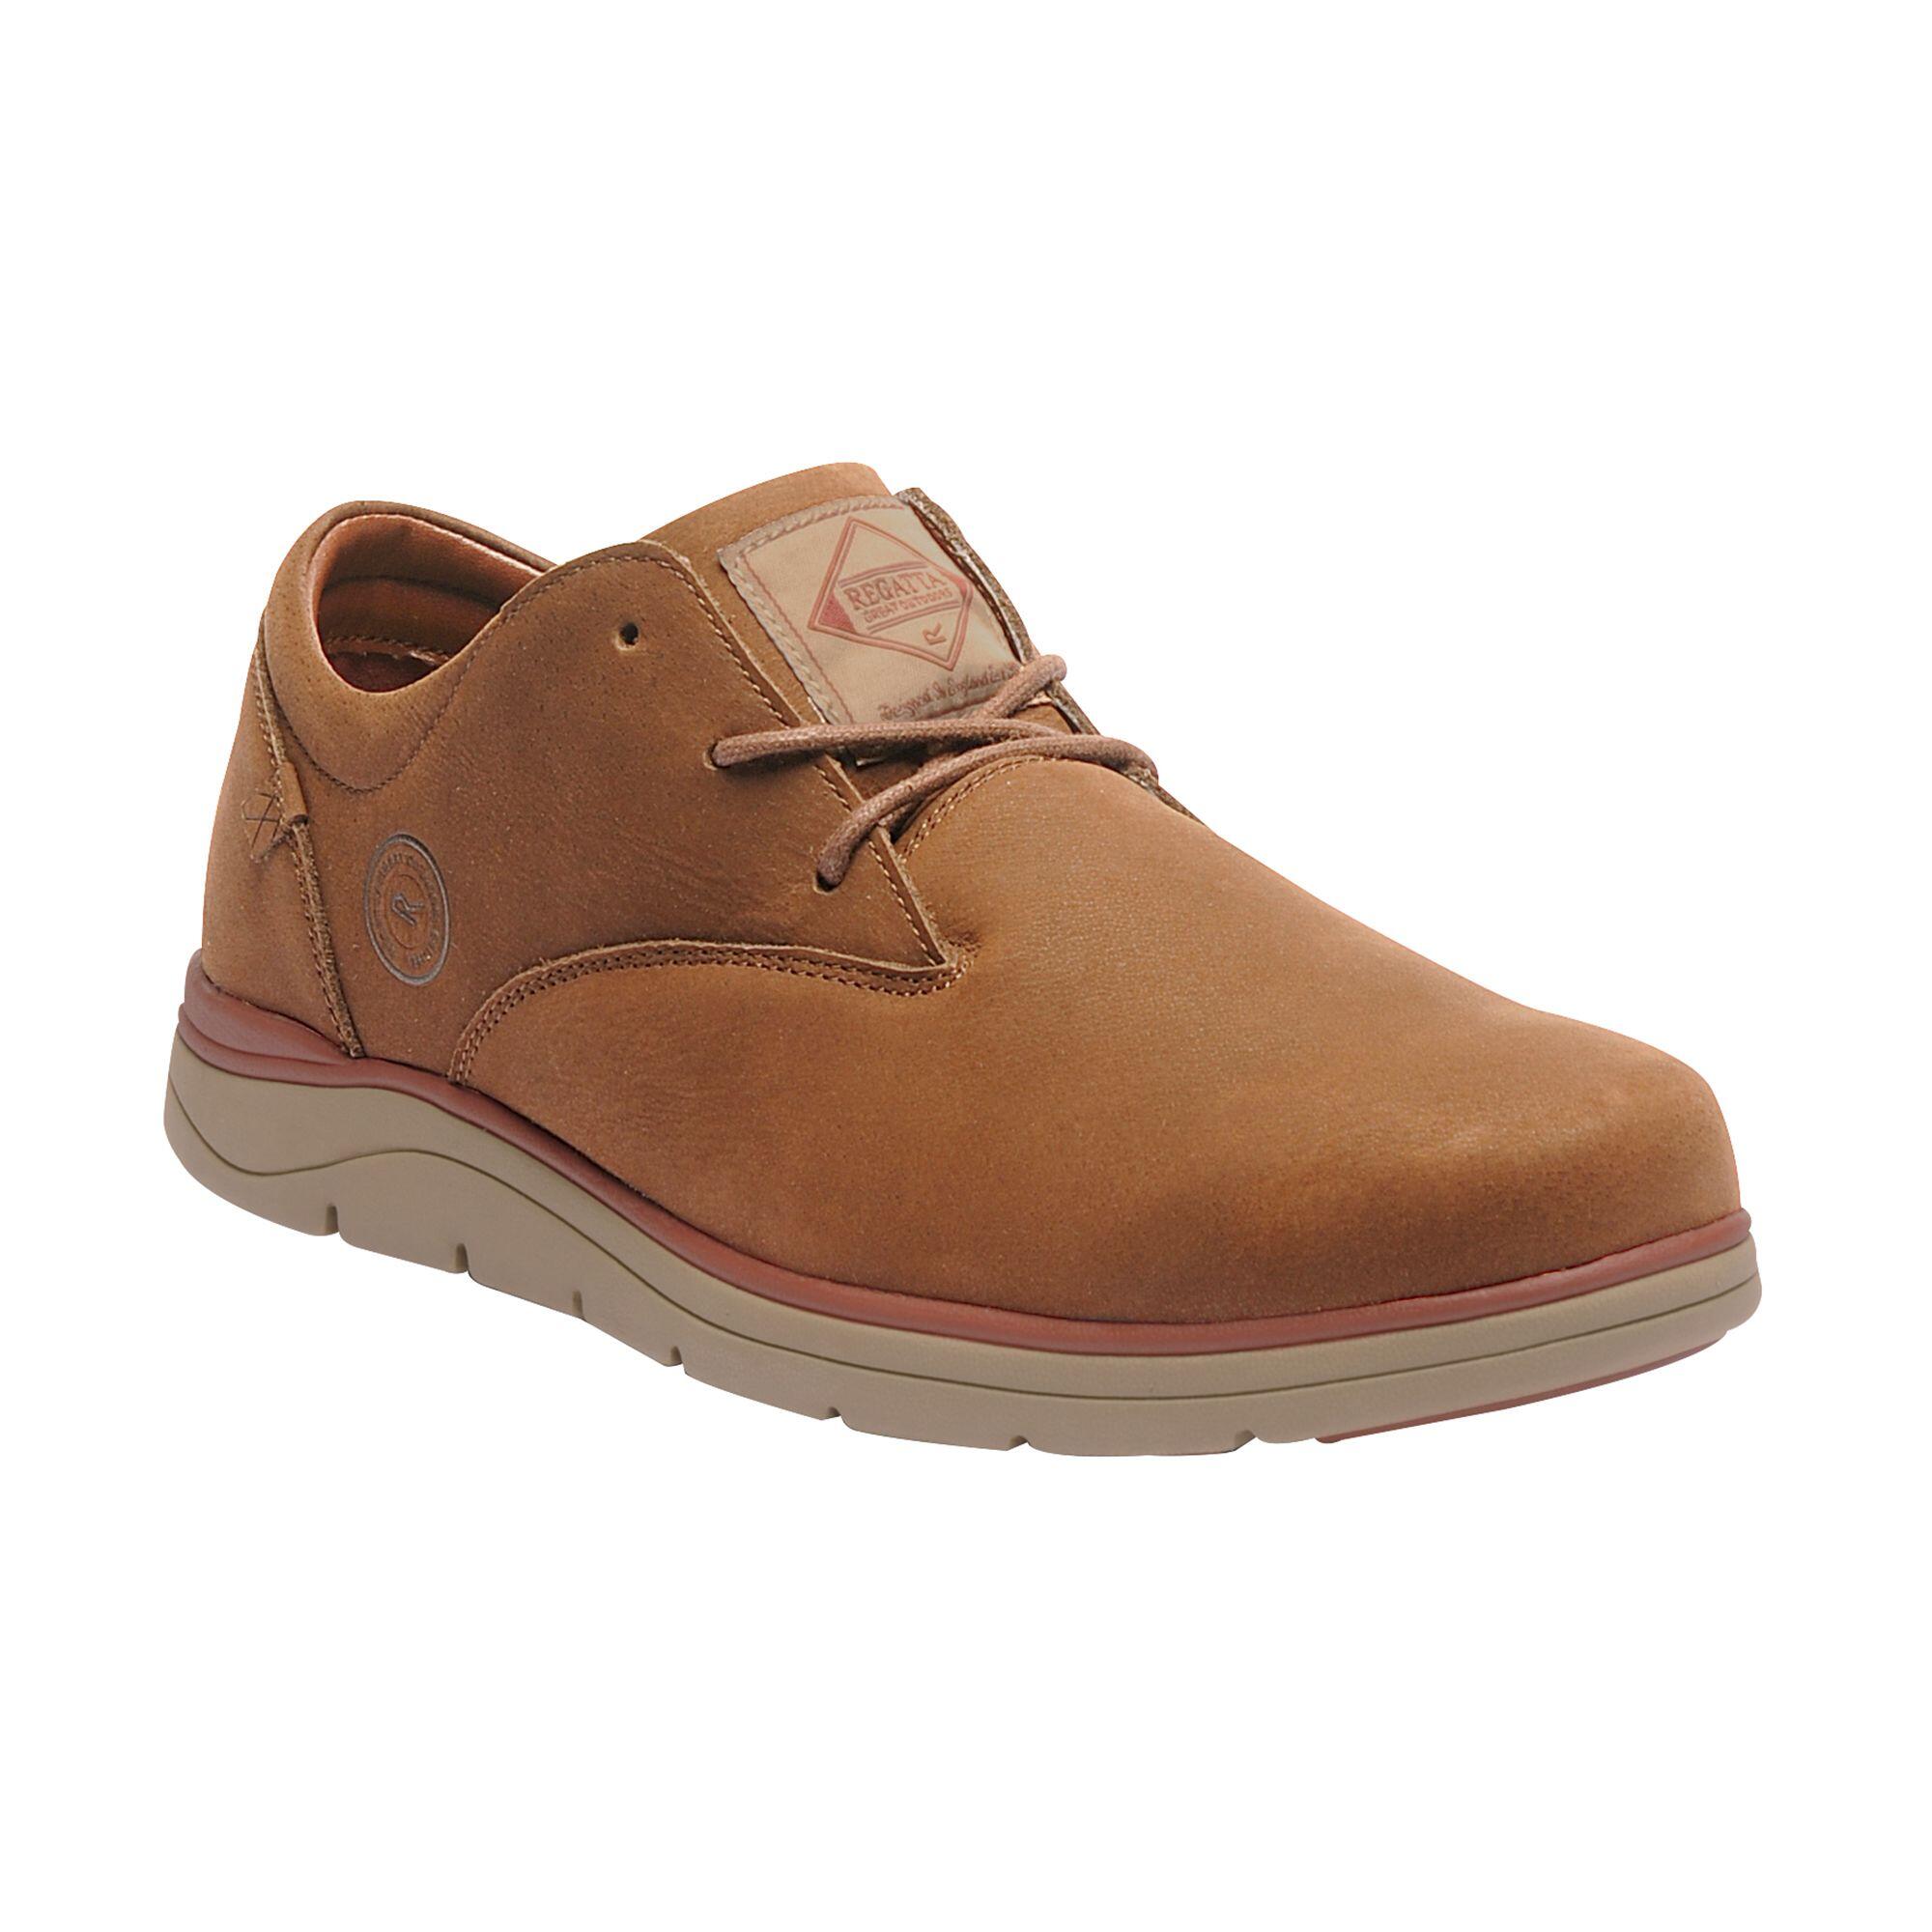 REGATTA Great Outdoors Mens Caldbeck Casual Shoes (Indian Chestnut)